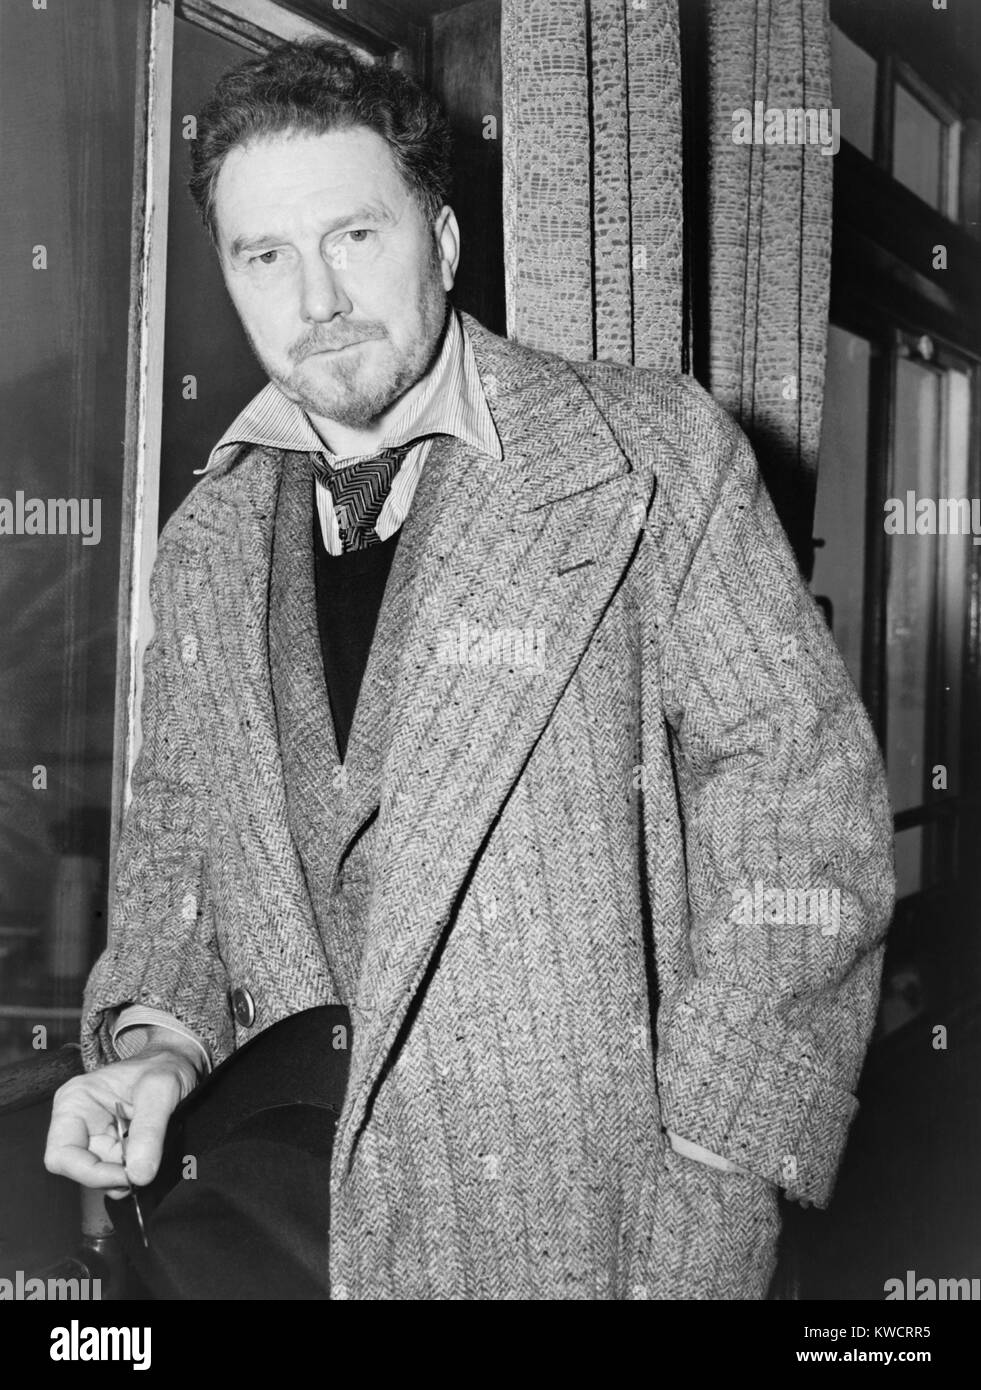 Ezra Pound, American born modernist poet who embraced European fascism in the 1930s. He was indicted in absentia for treason in July 1943 for anti American broadcasts he made from Italy during WW2. - (BSLOC 2015 1 34) Stock Photo